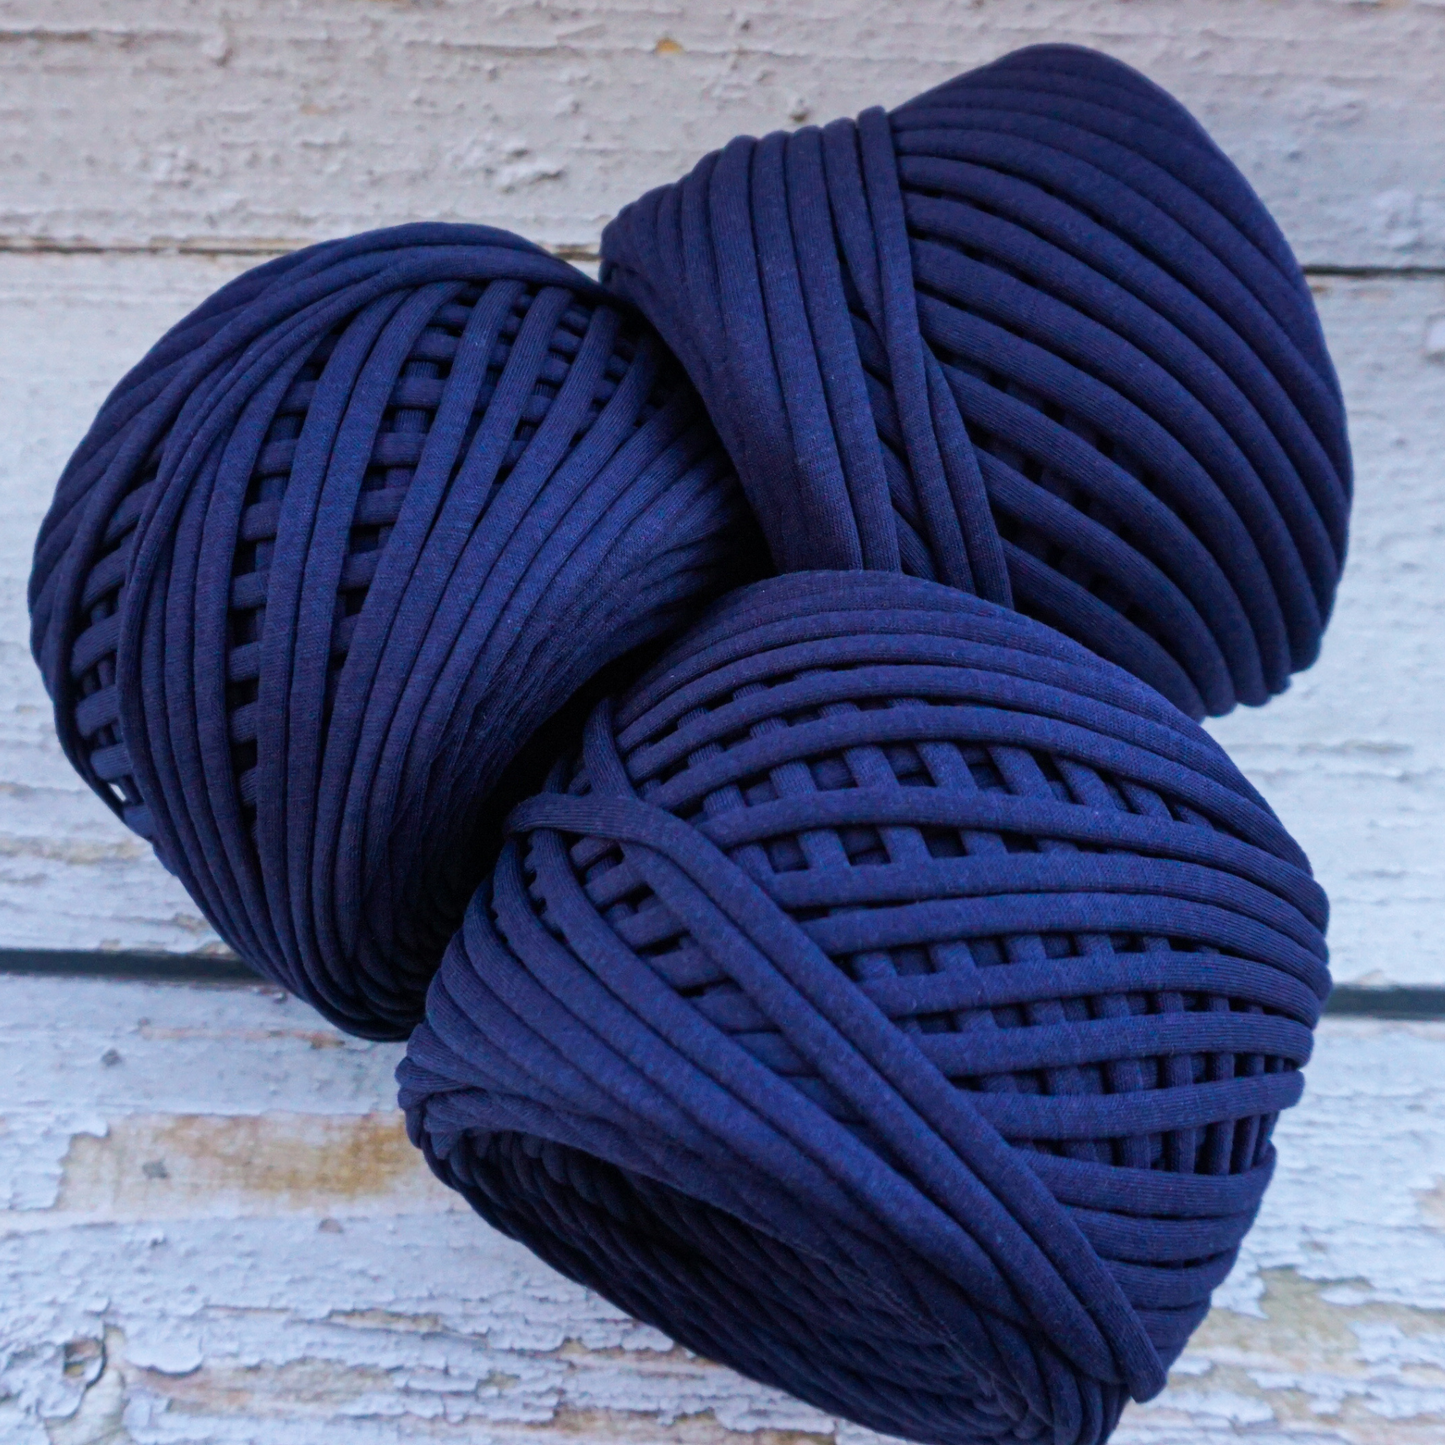 T-shirt yarn for crocheting baskets, bags, rugs and home decor.  Dark blue